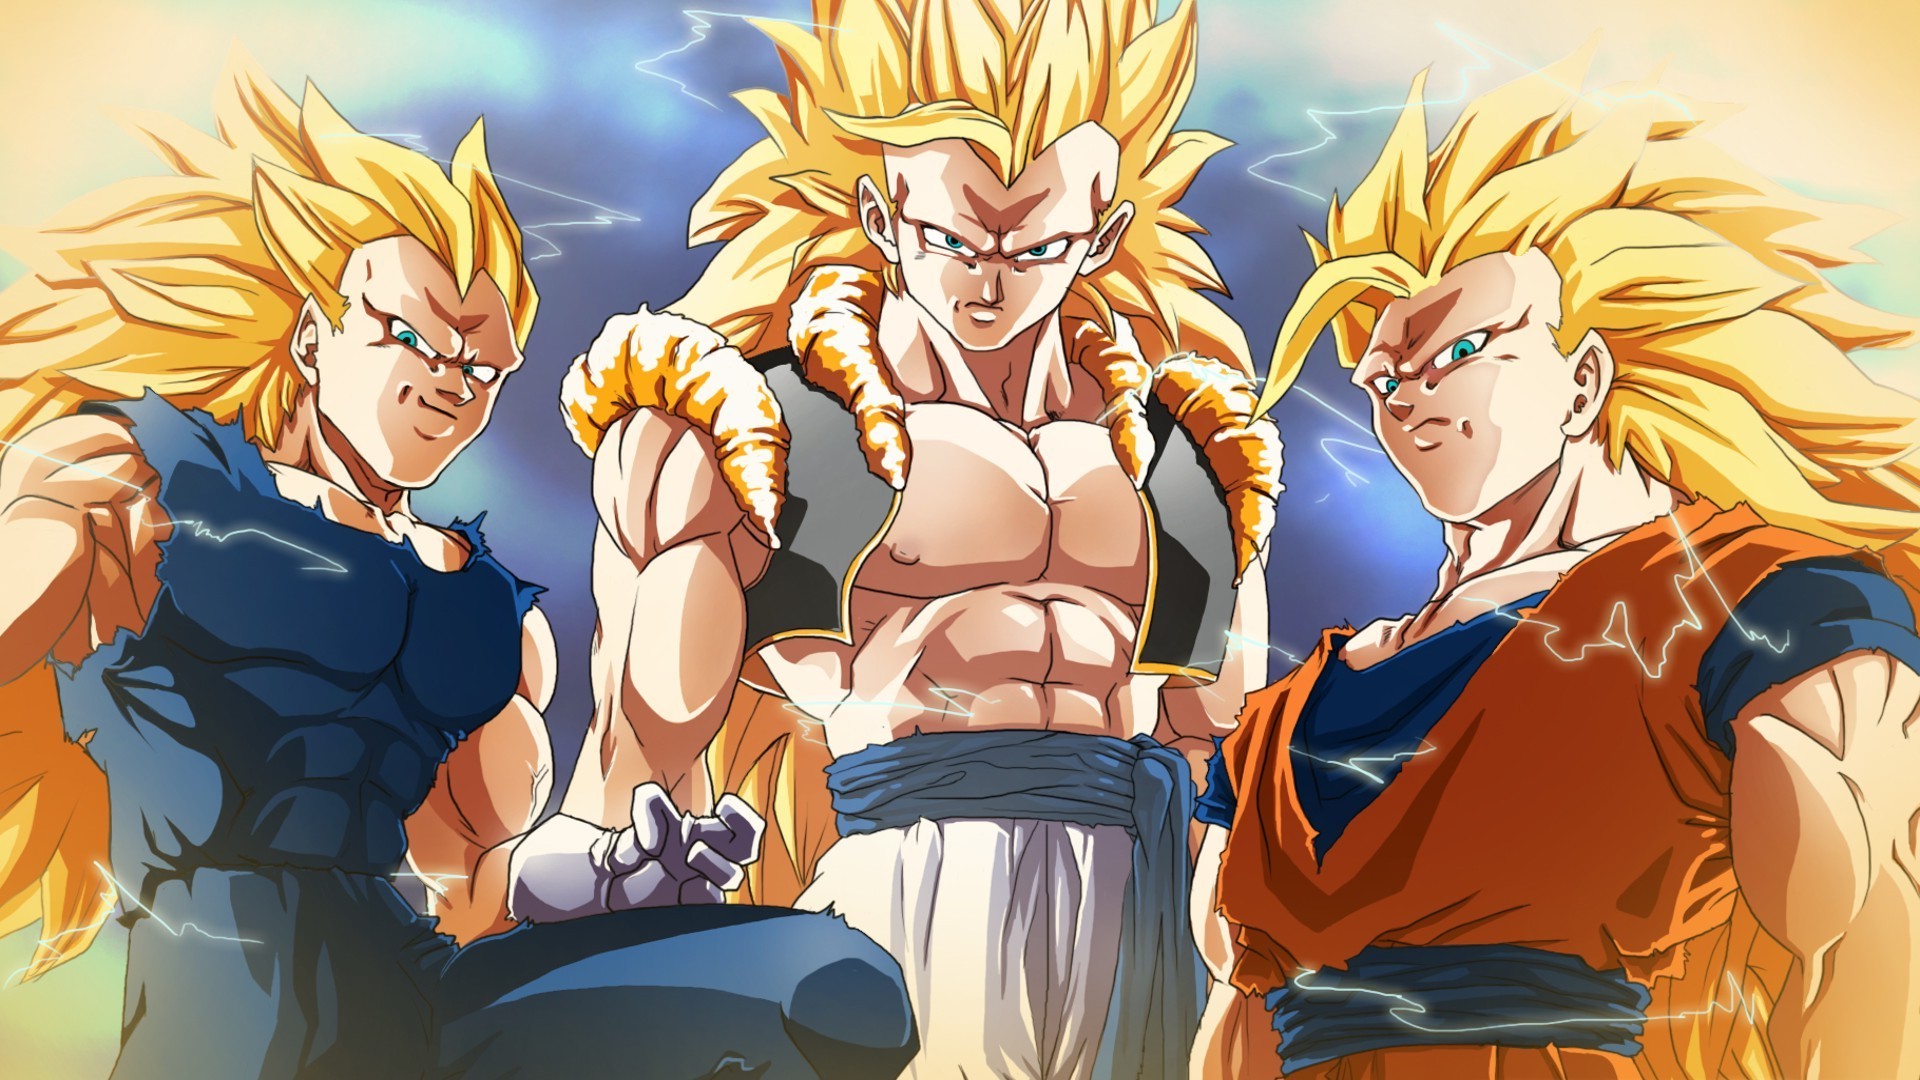 Wallpaper HD Goku SSJ3 with image resolution 1920x1080 pixel. You can make this wallpaper for your Desktop Computer Backgrounds, Mac Wallpapers, Android Lock screen or iPhone Screensavers